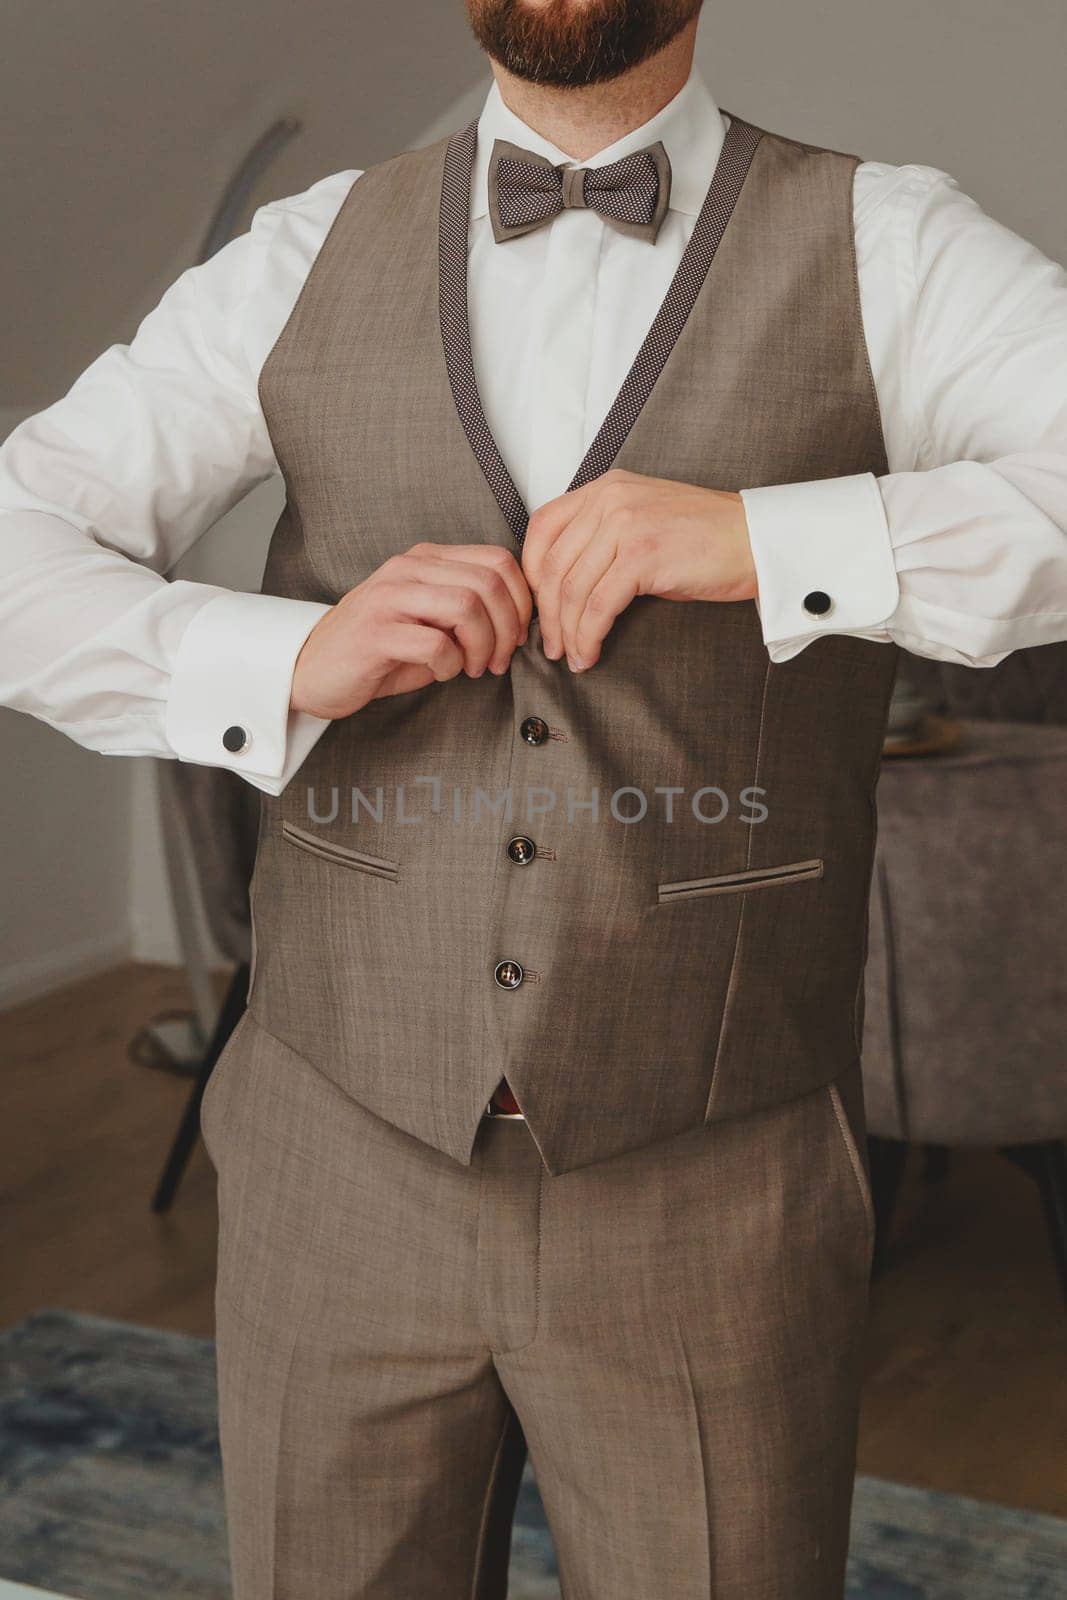 Groom buttons up the front of the waistcoat. by leonik